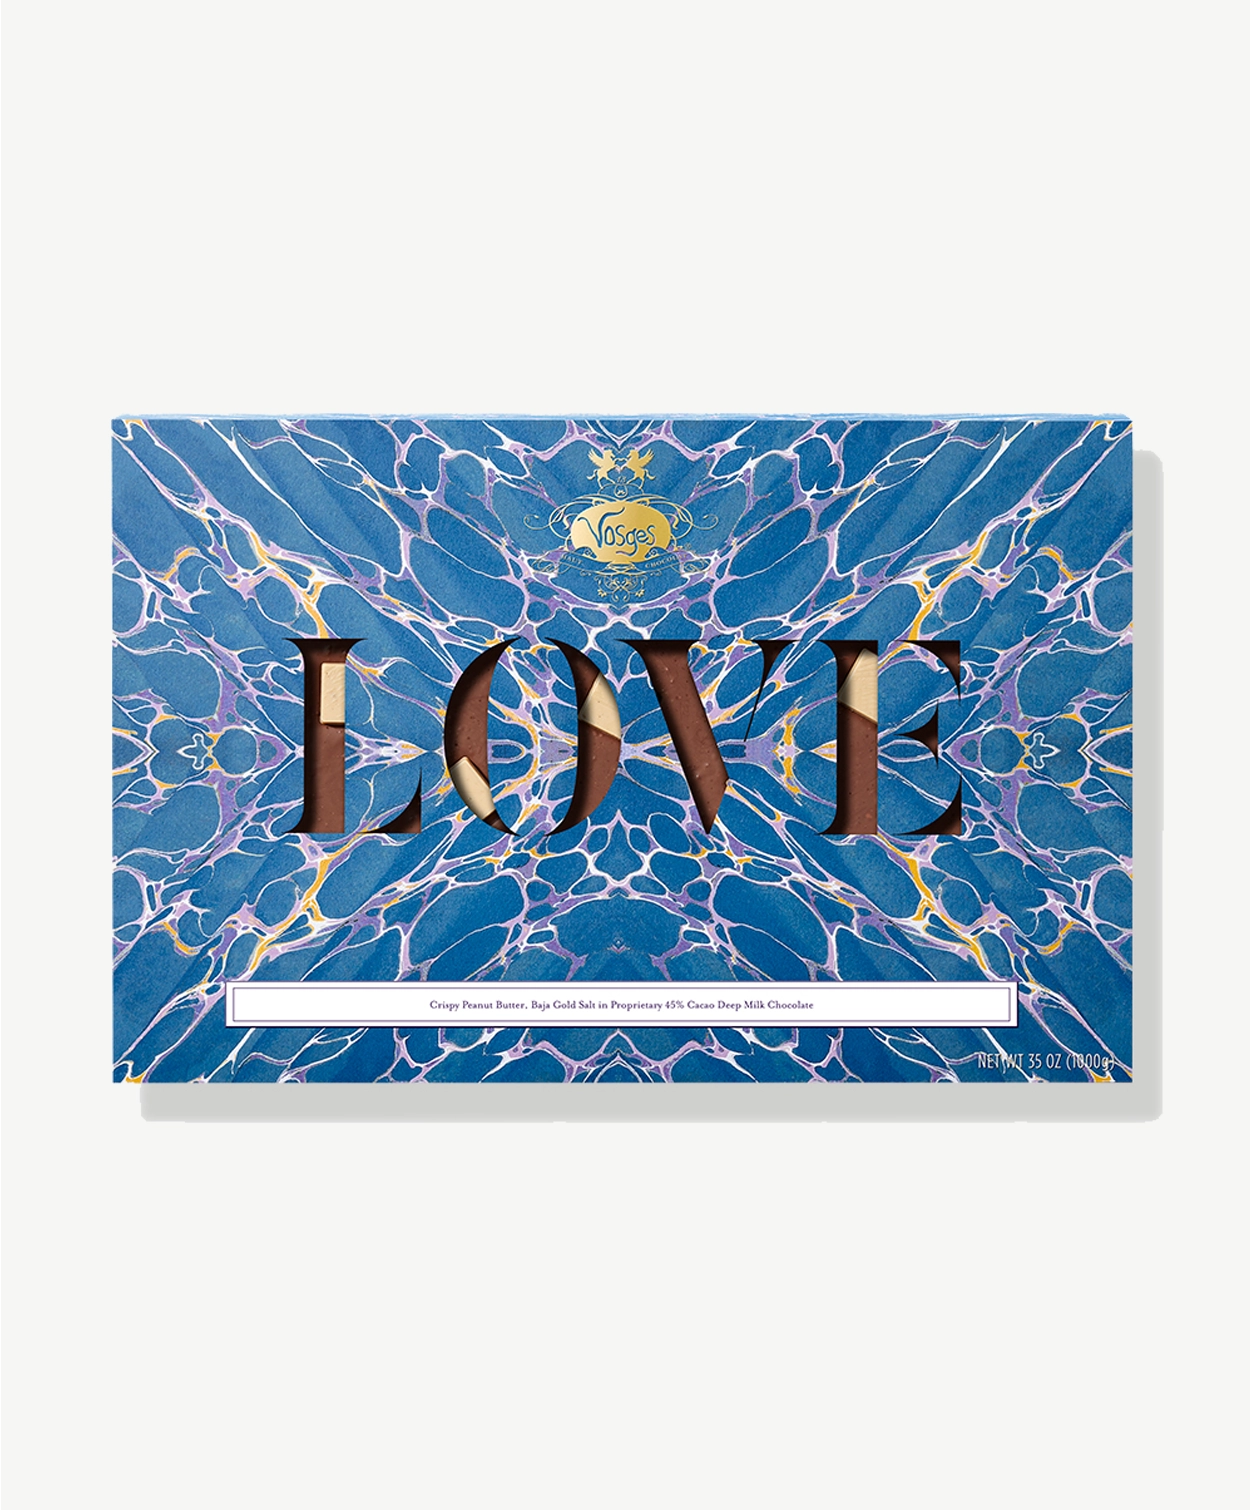 Large two pound slab of Vosges Choclate wrapped in a bright blue psychedelic wrapper reading, "Love" 